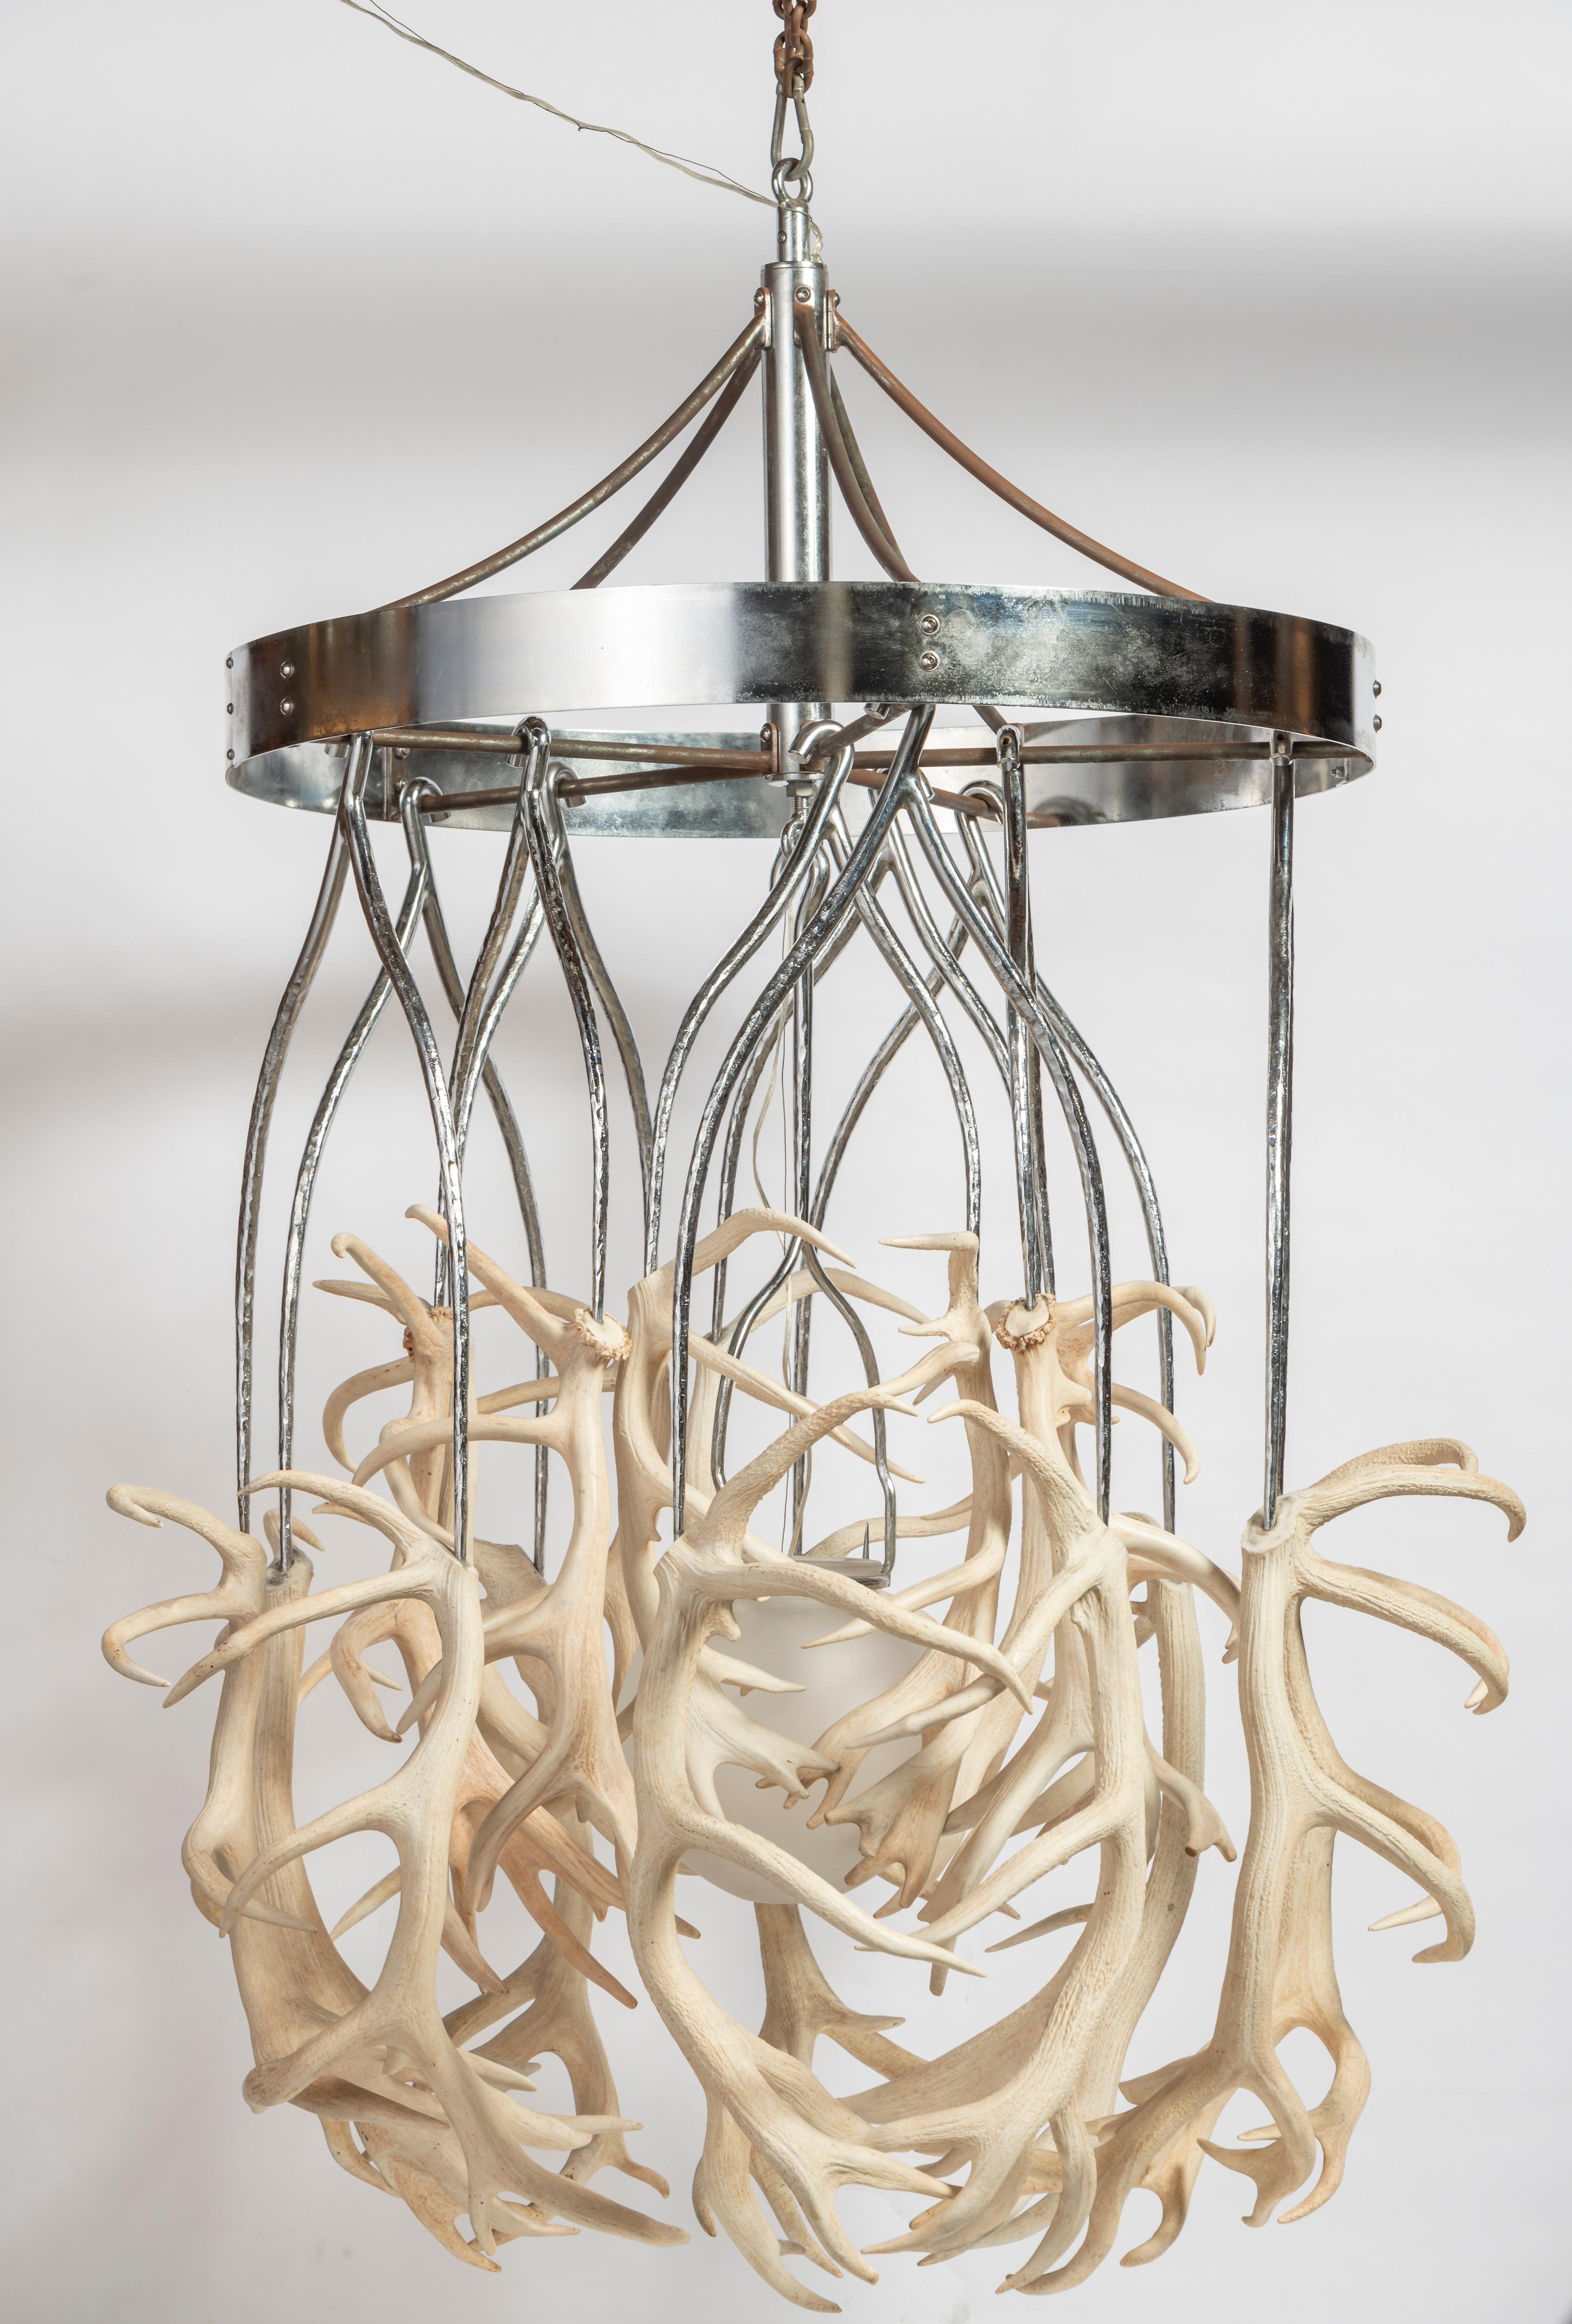 Alex Randall is an award-winning lighting designer based in London. The Antler Chandelier is crafted with ten pairs of humanely sourced red deer antlers, hanging from giant forged steel and chrome wishbone shaped hooks forming a 